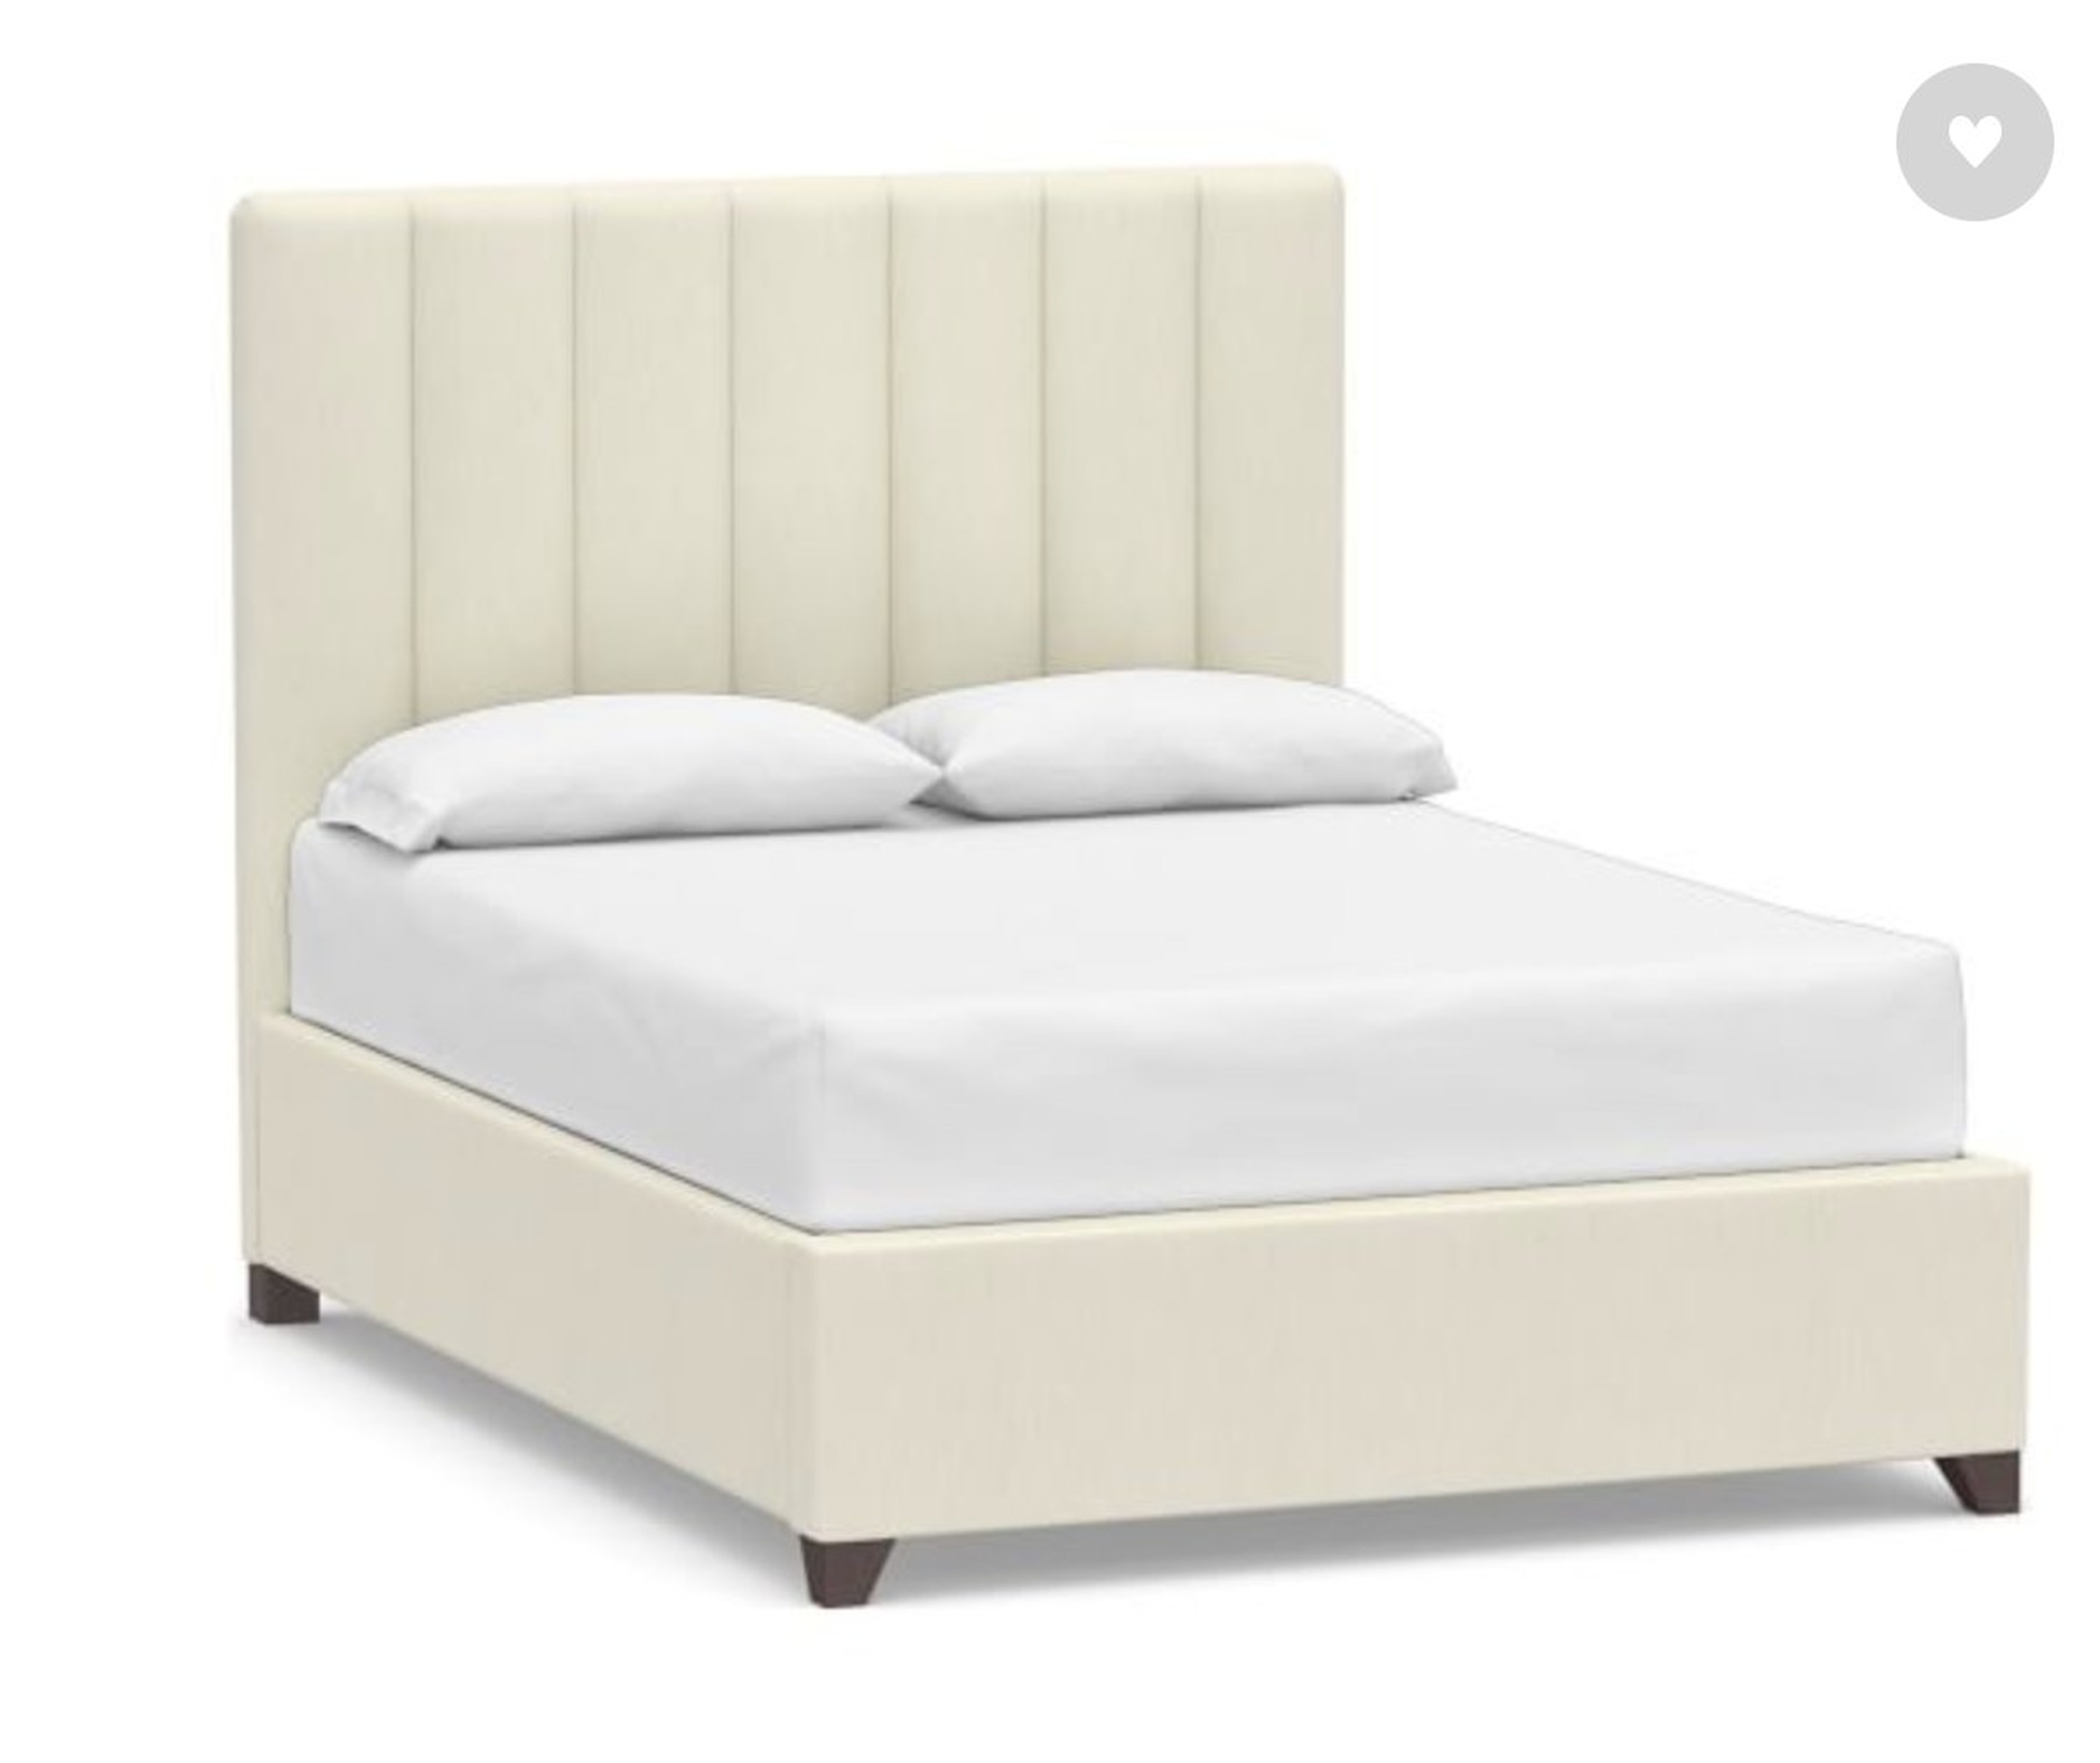 Kira Channel Tufted Upholstered Bed, California King, Premium Performance Basketweave Ivory - Pottery Barn